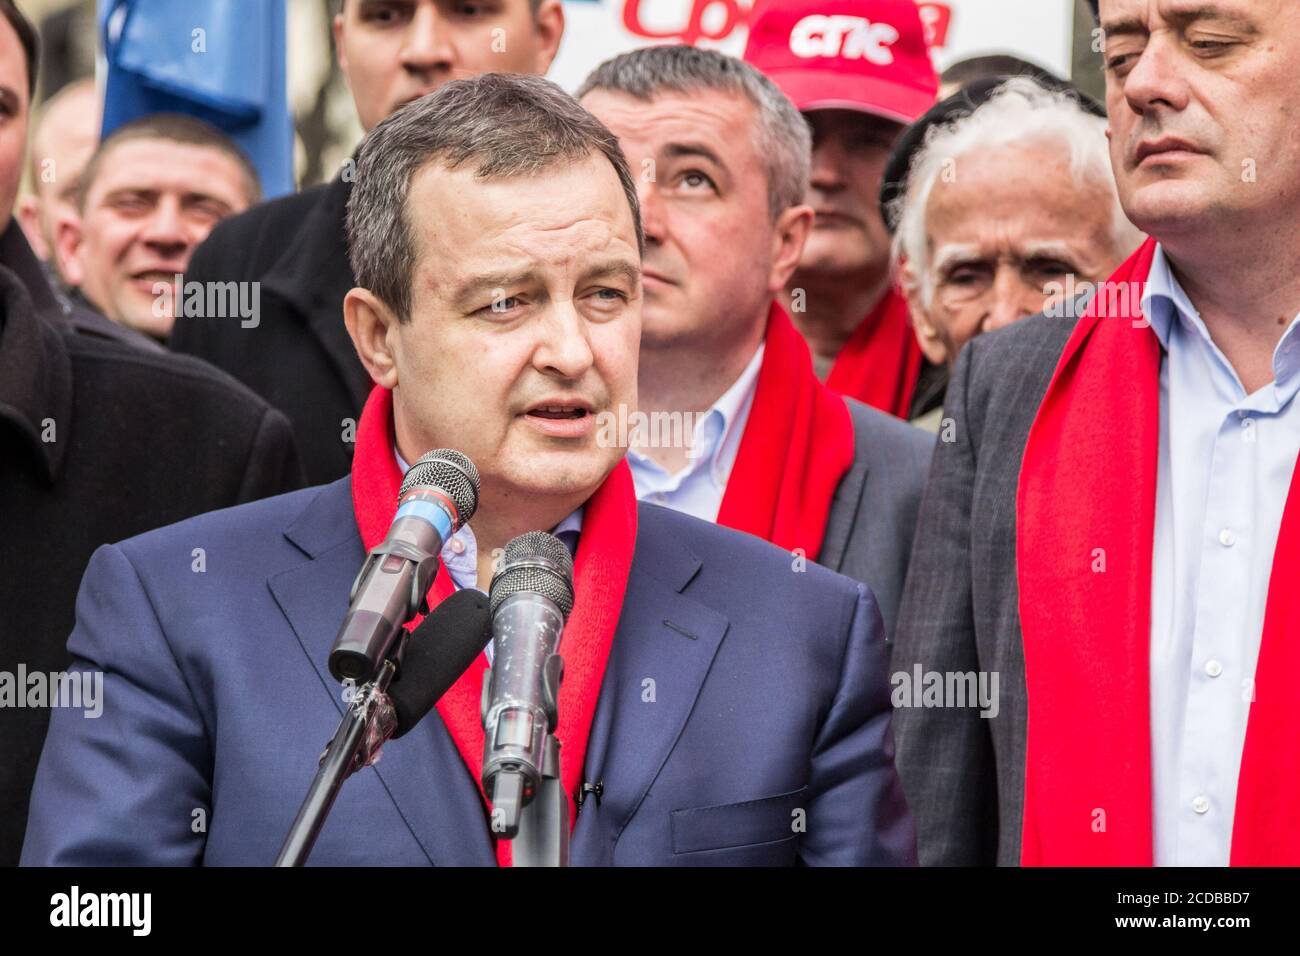 SUBOTICA, SERBIA - MARCH 27, 2016:  Ivica Dacic, Serbian Minister of Foreign Affairs & Leader of the Socialist Party of Serbia holds a speech during t Stock Photo